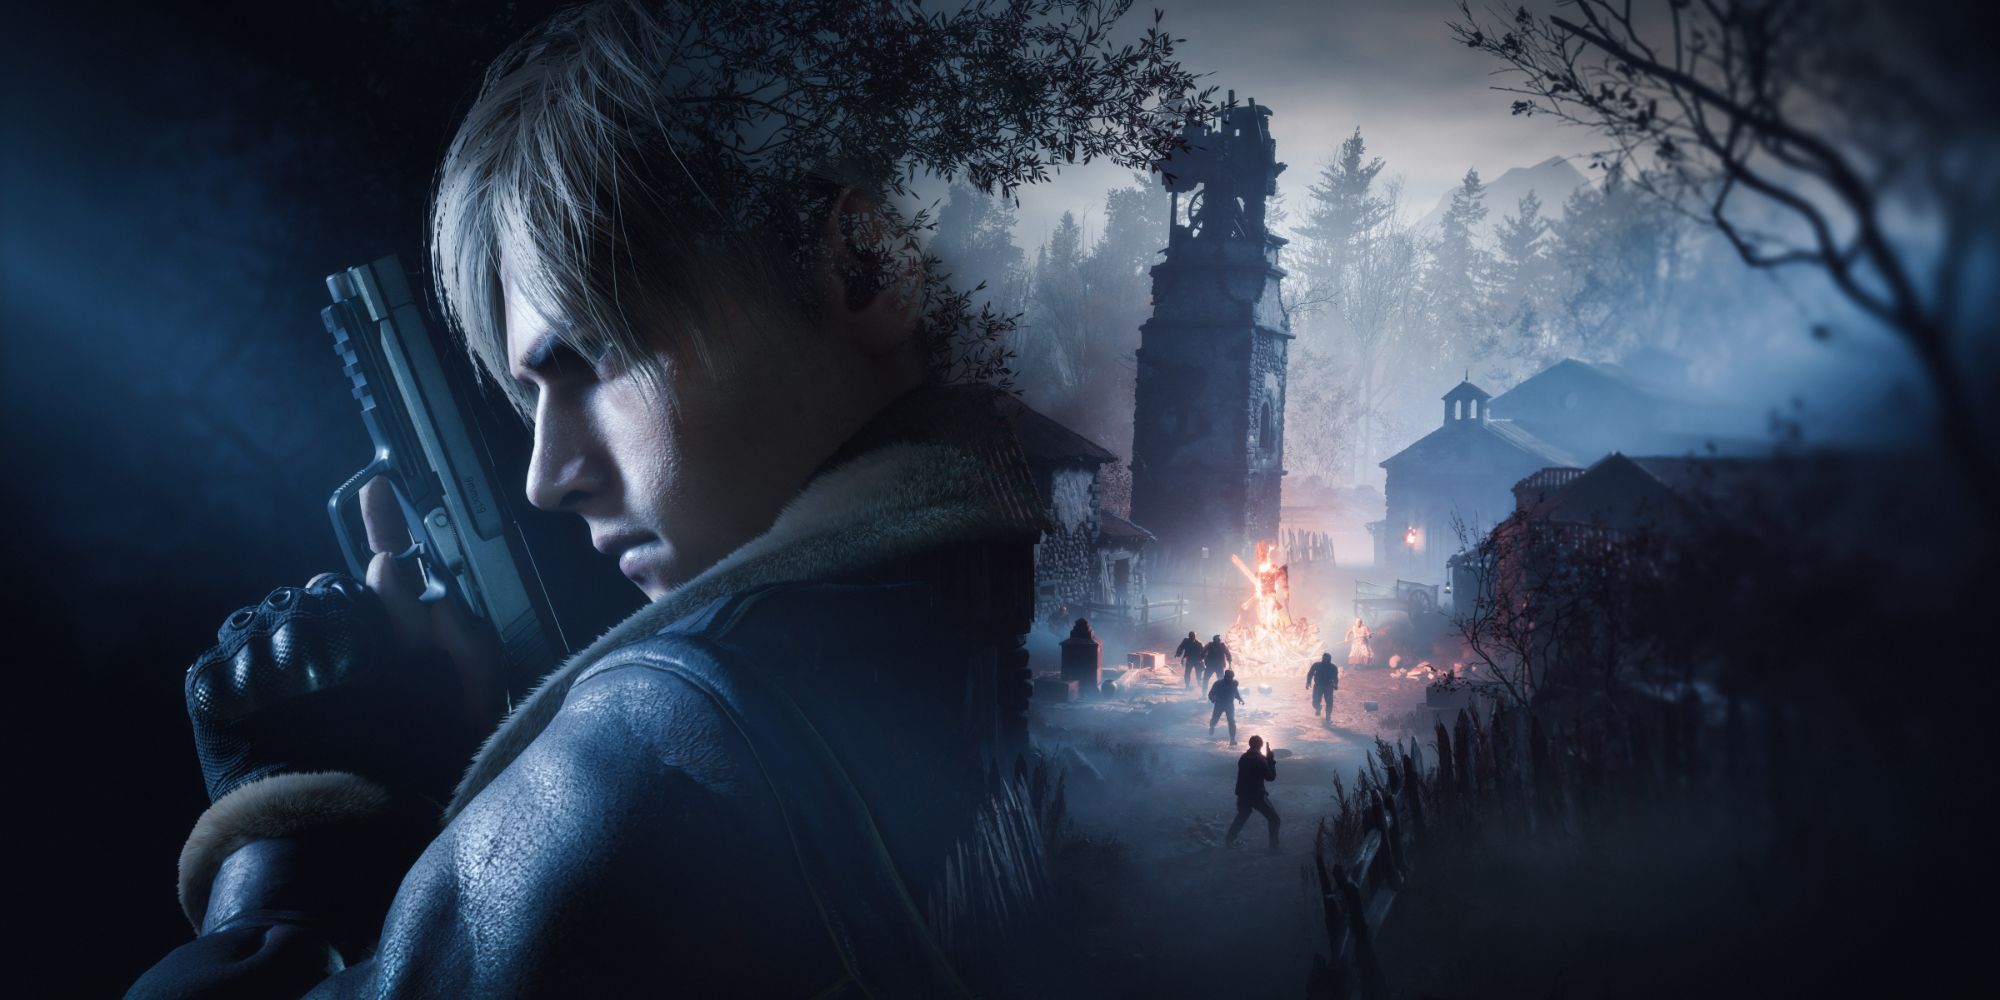 Resident Evil 4 Remake Leon Kennedy with the village in the background